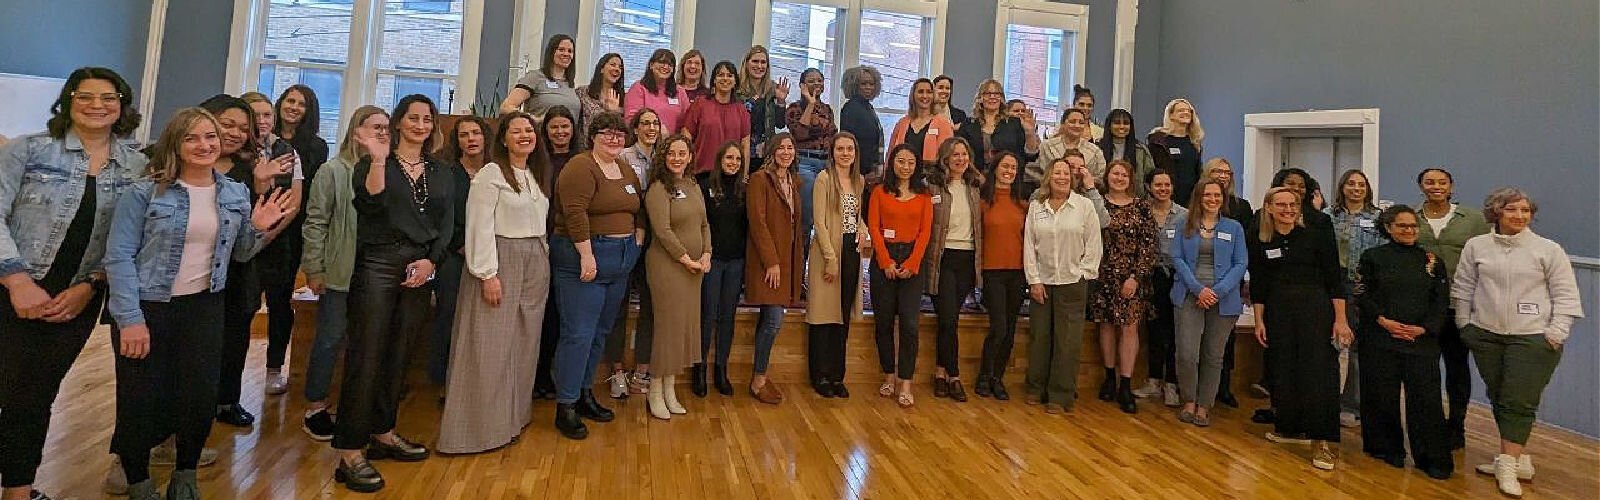 Women’s Day event celebrates and empowers women in tech. 